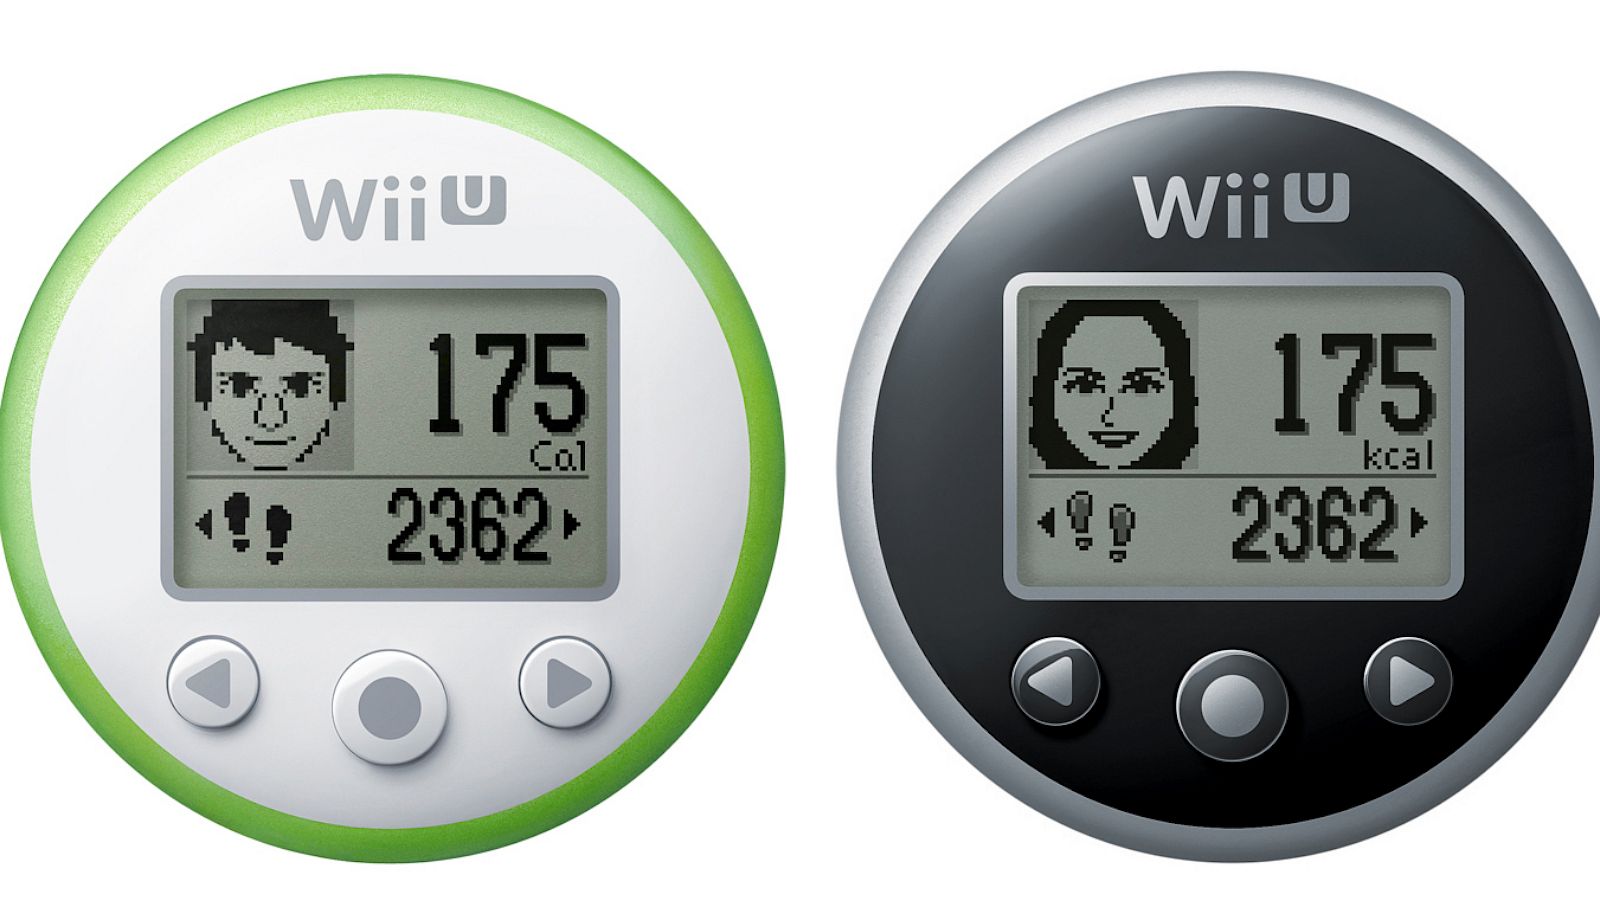 Tektonisch Parana rivier onenigheid The Wii Fit Meter Makes Kids Clamor To Get “Tracked” - ABC News